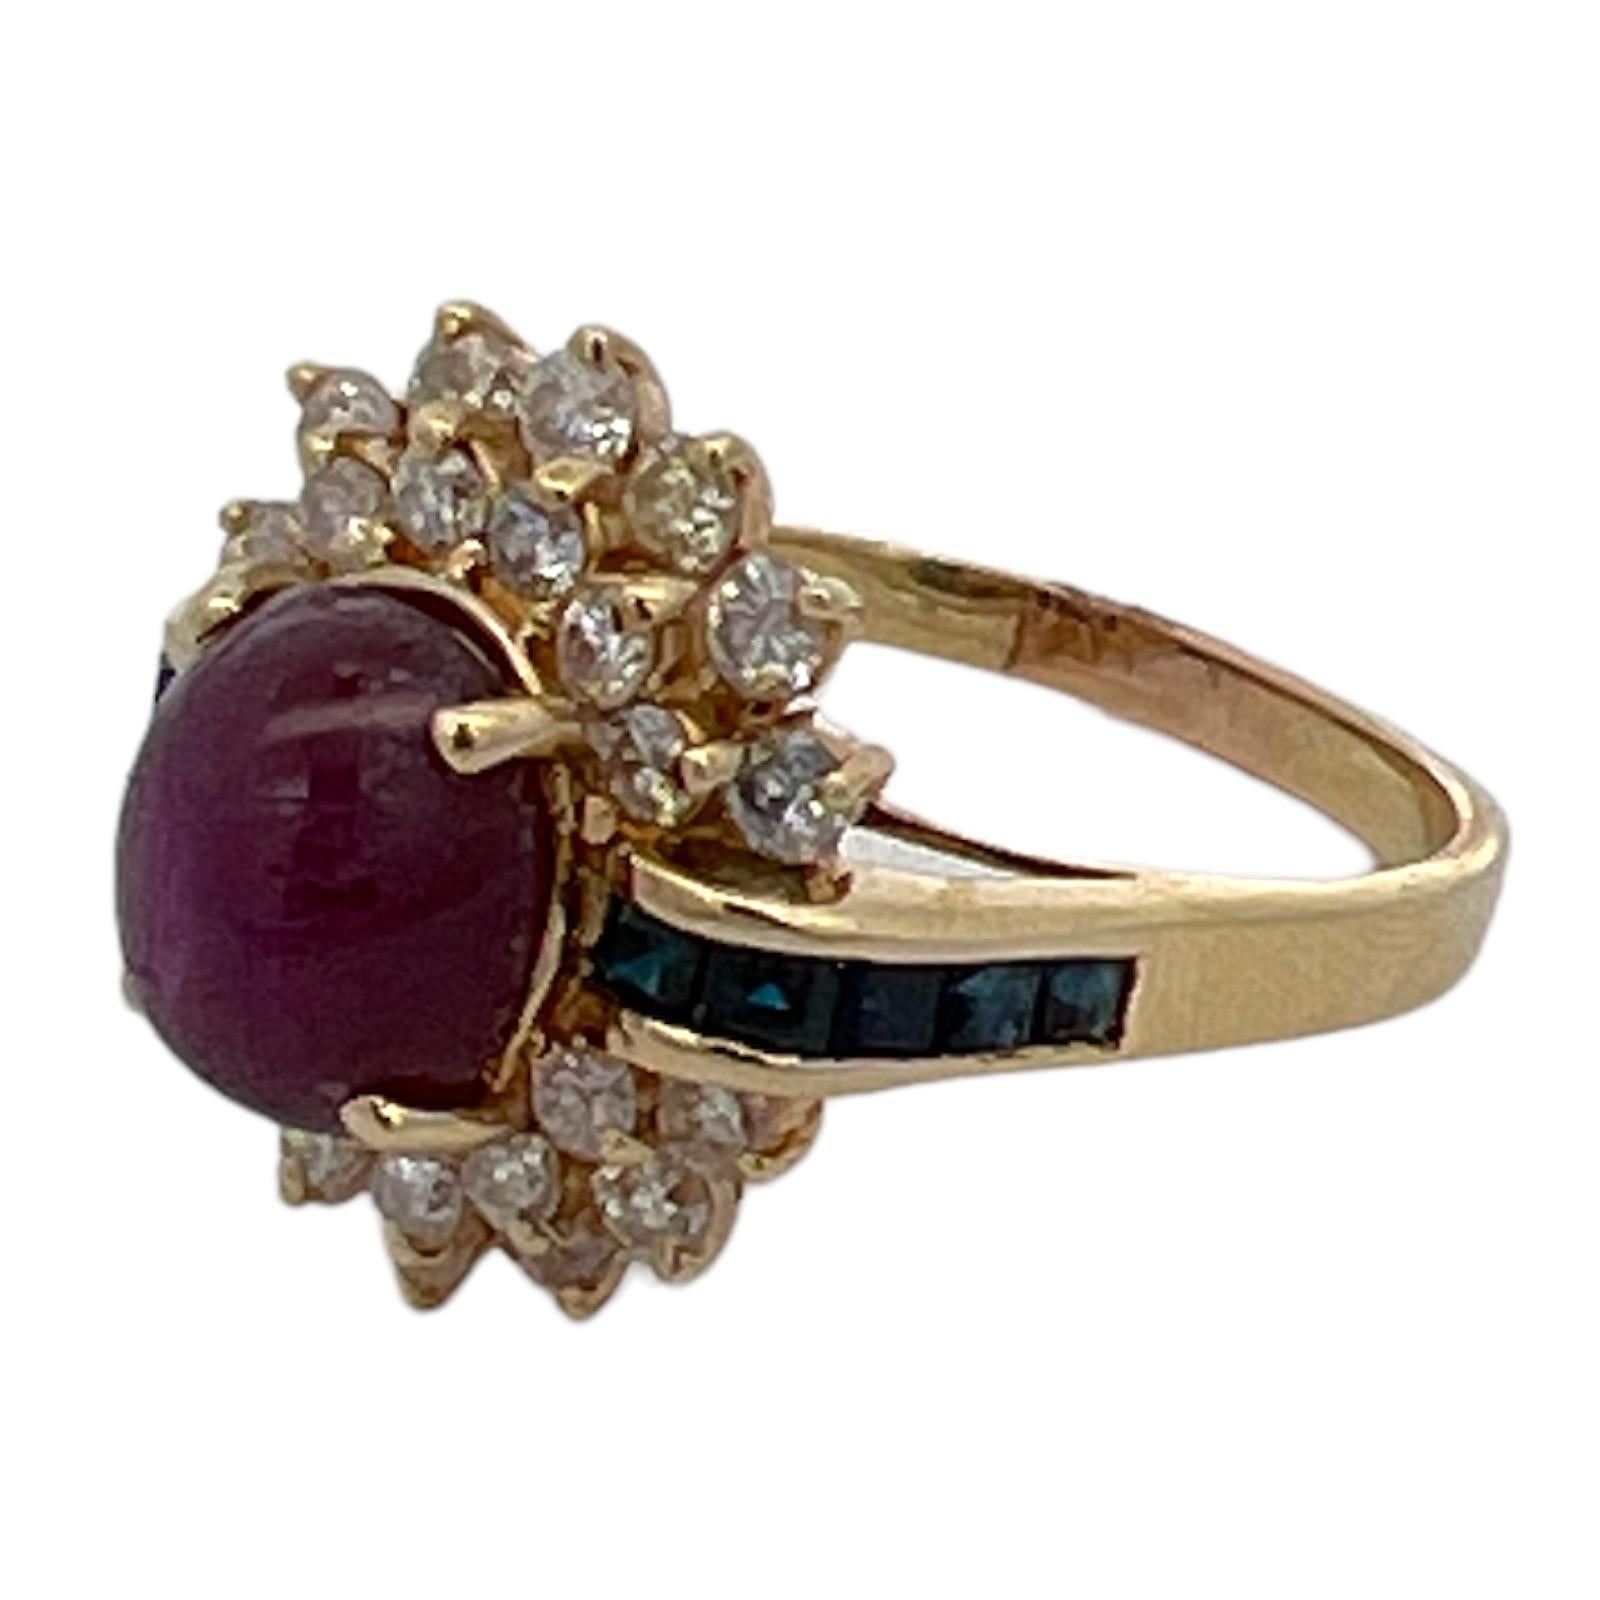 Star ruby diamond sapphire vintage cocktail ring crafted in 14 karat yellow gold. The ring features an approximately 3.00 carat star ruby gemstone, 26 round brilliant cut diamonds weighing approximately 1.00 CTW, and sapphire accents. The diamonds